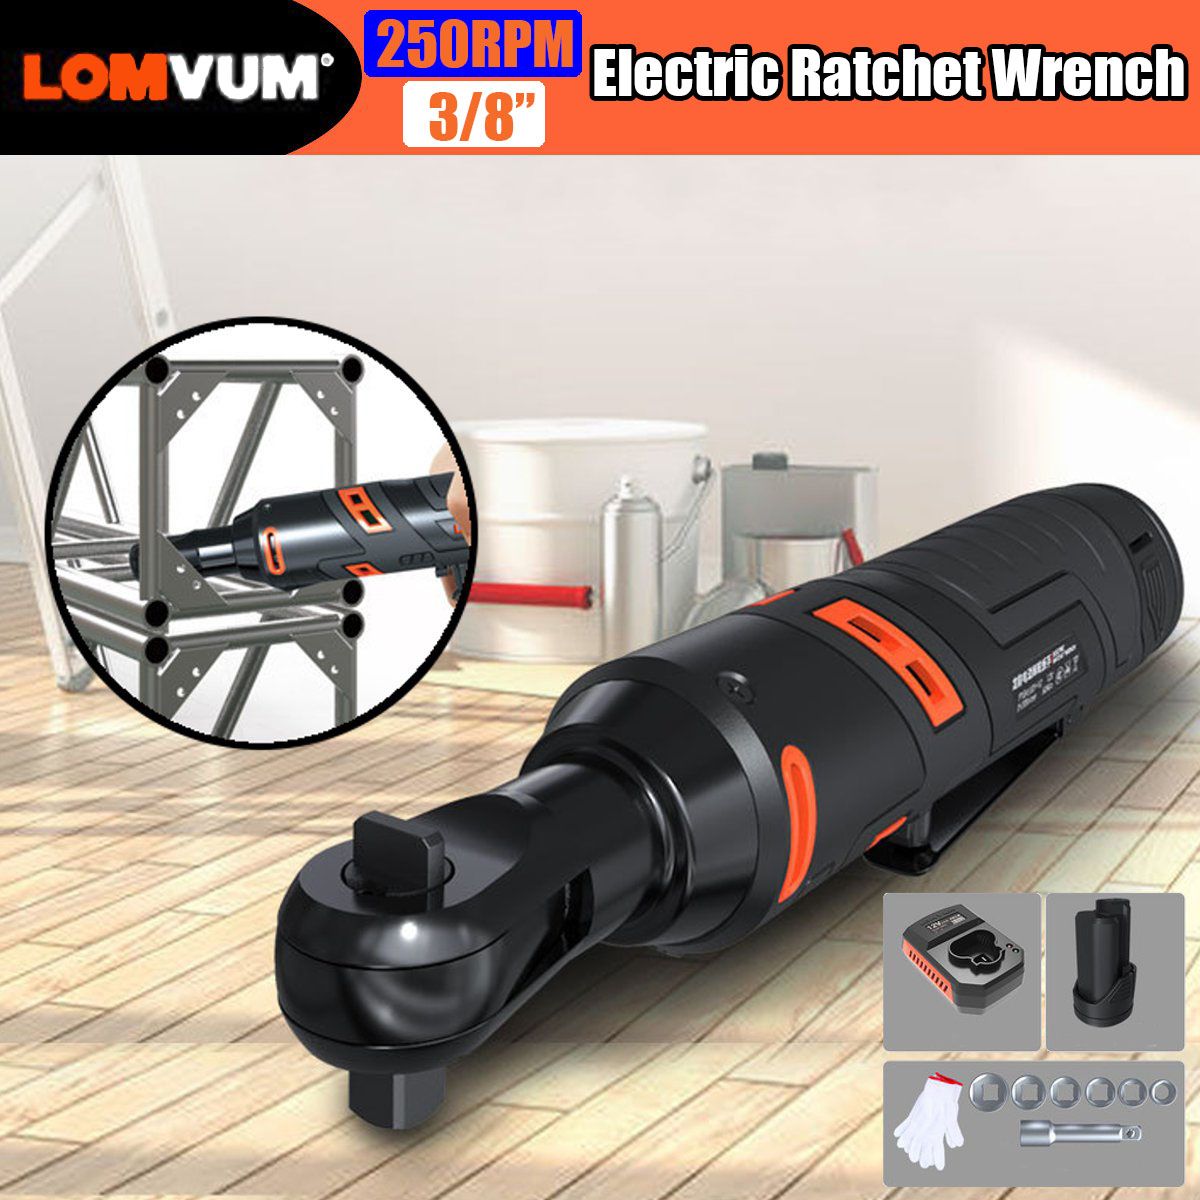 Power-Cordless-Ratchet-Wrench-Toolkit-38Inch-60NM-12V-Electric-Ratchet-Wrench-Right-Angle-With-Batte-1529794